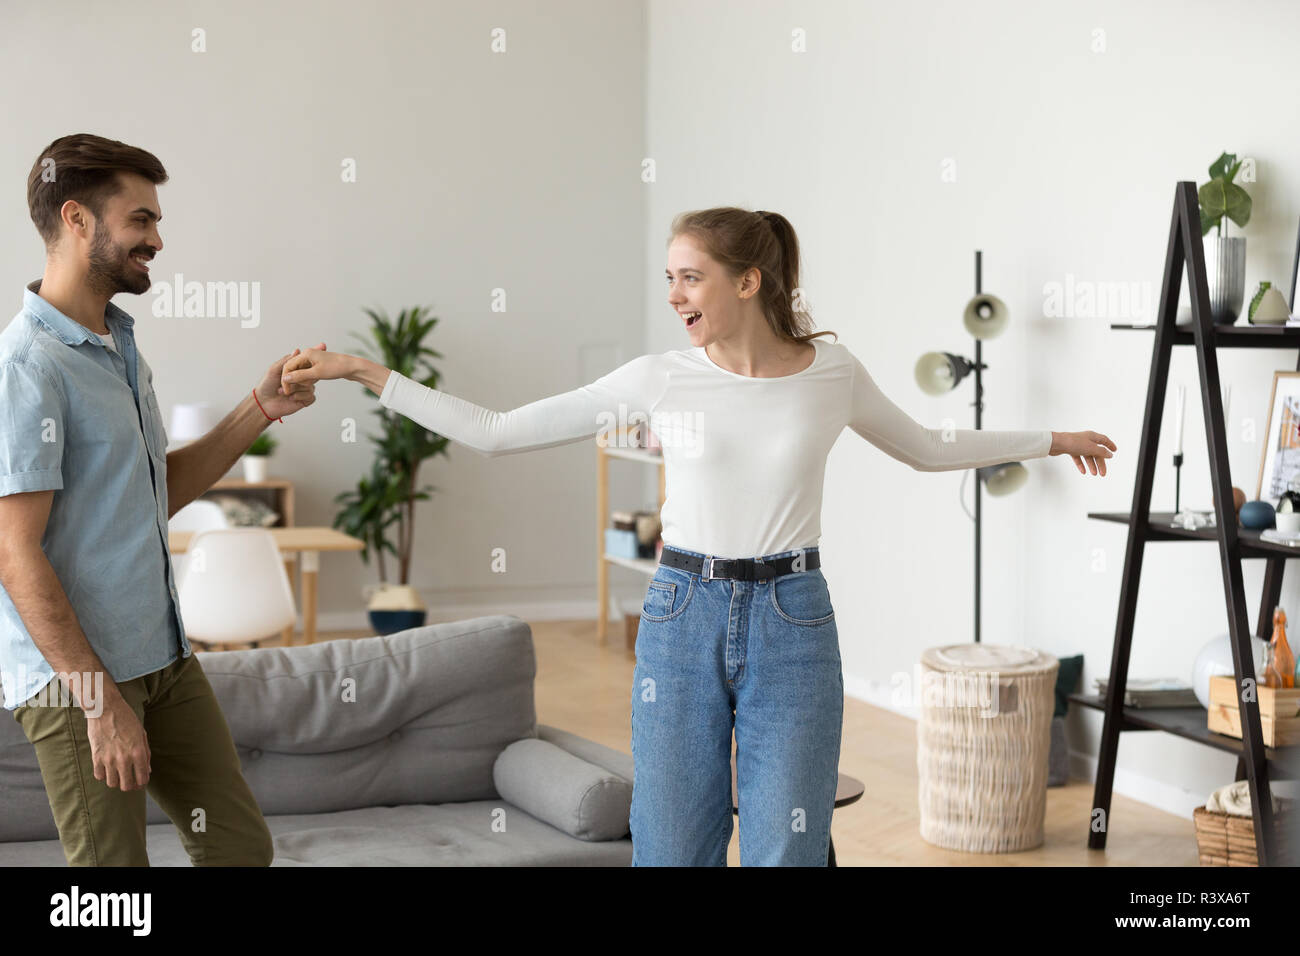 Happy couple have fun dancing in living room together Stock Photo